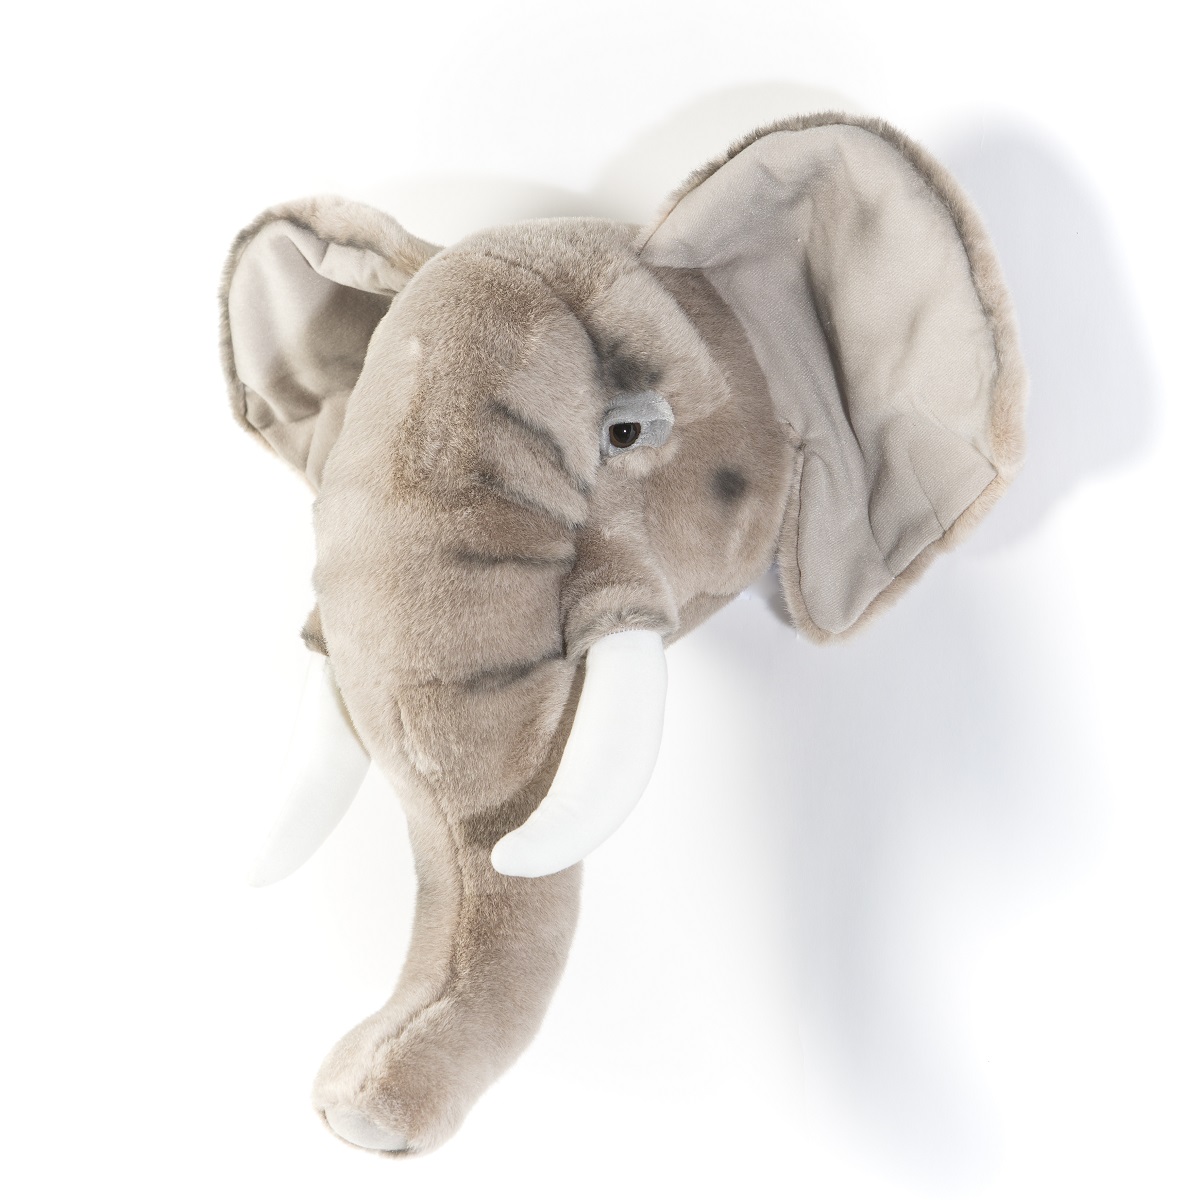 Head Large Elephant, George PRE-ORDER FOR LATE JUNE